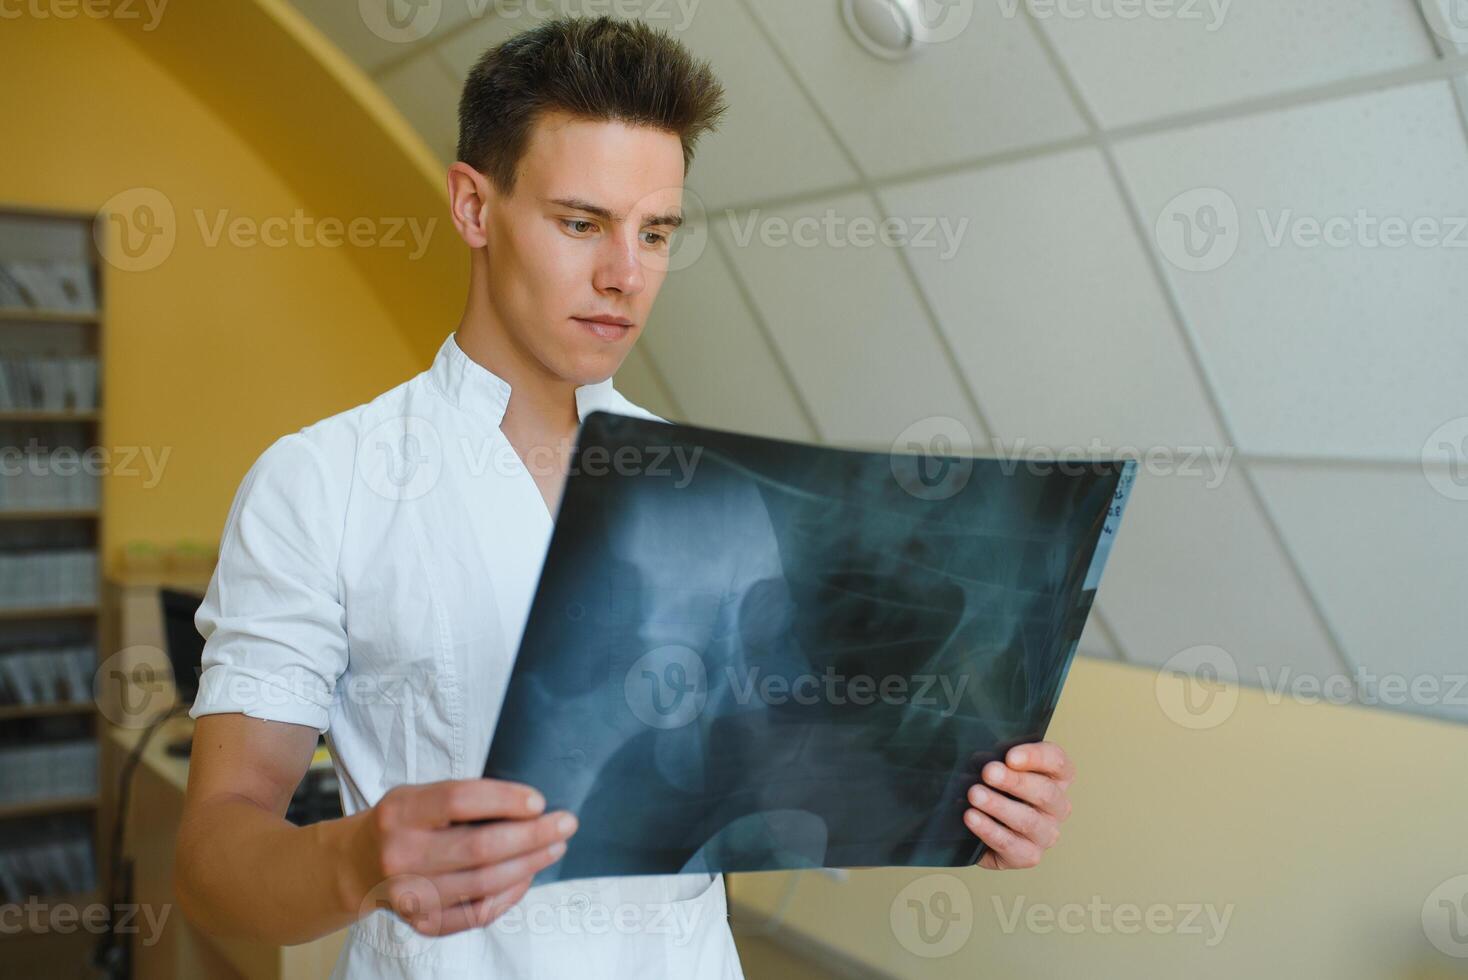 hospital doctor holding patient's x-ray film photo